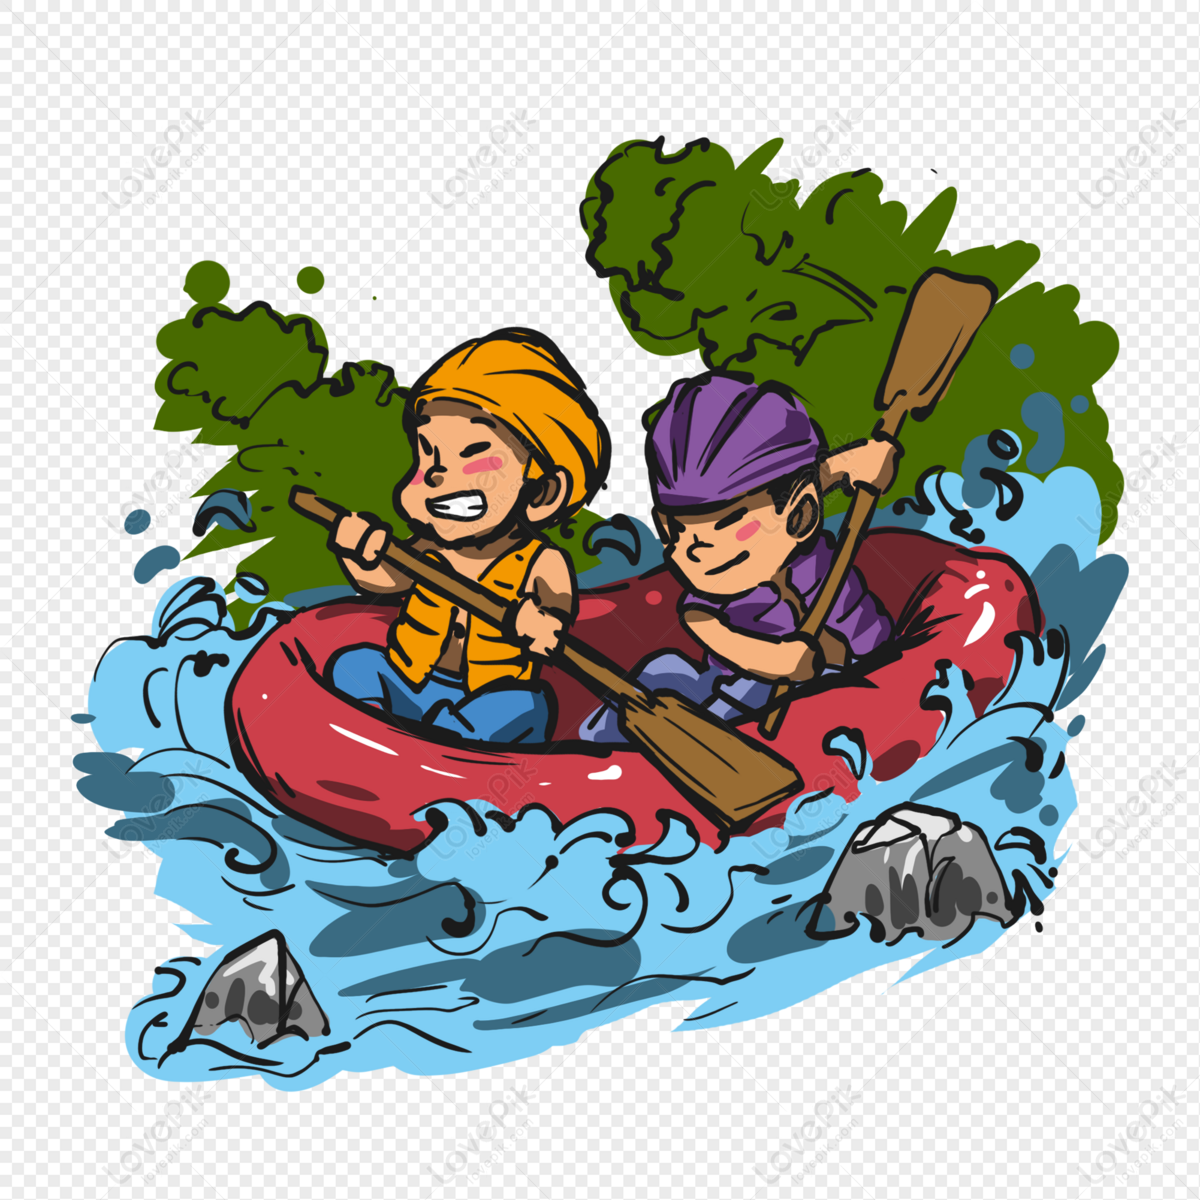 Children Drifting PNG Images With Transparent Background | Free ...